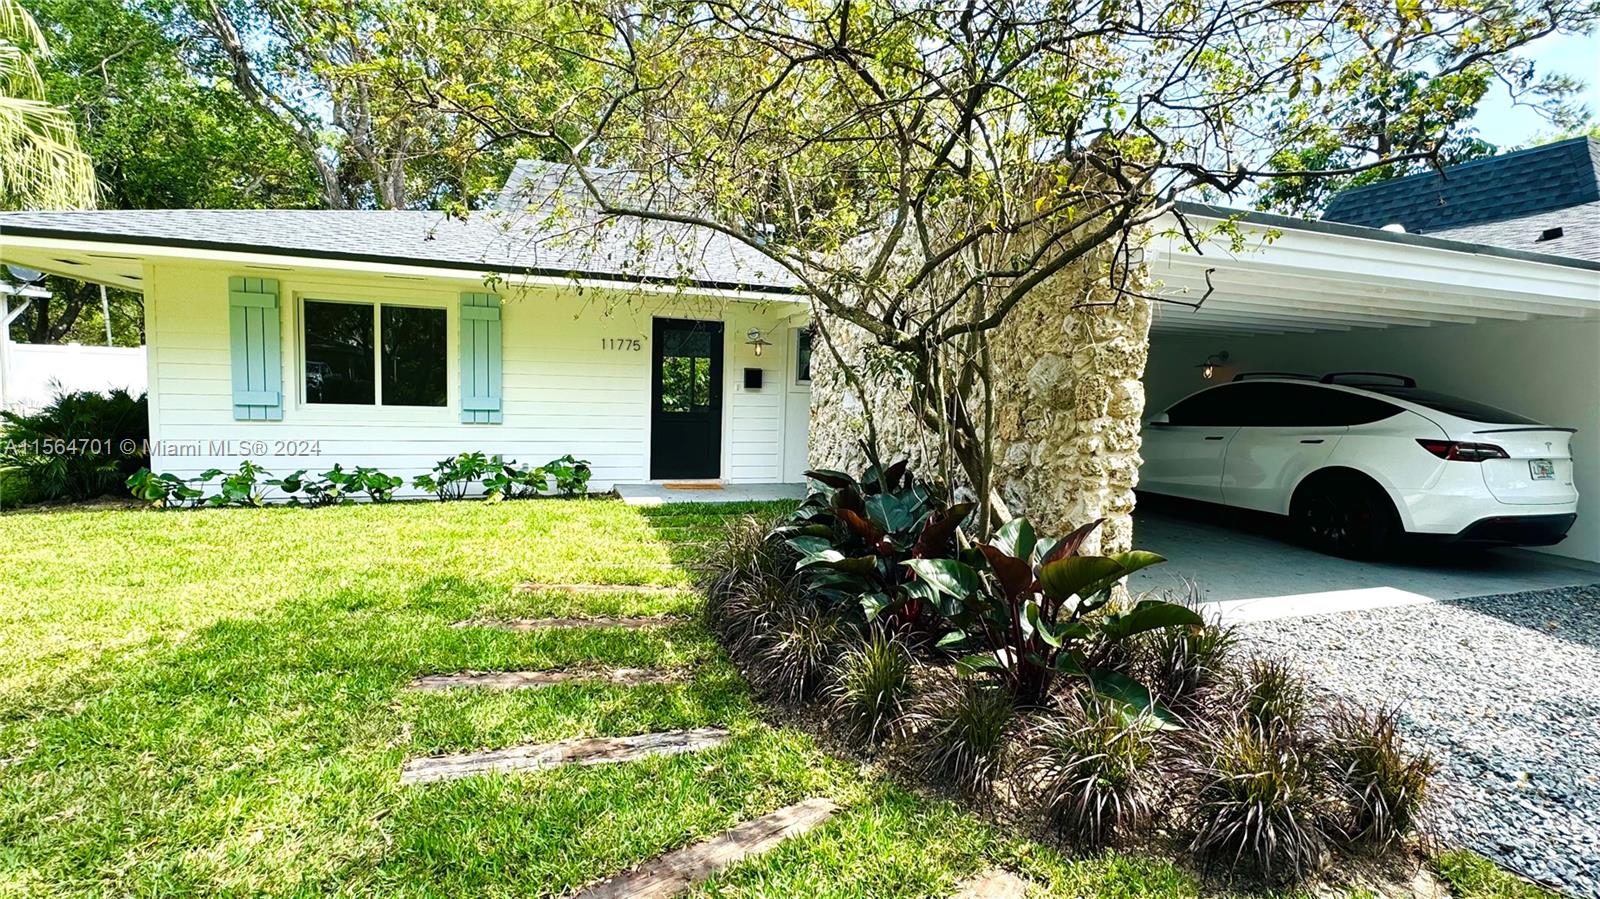 Rental Property at 11775 Sw 81st Rd Rd, Pinecrest, Miami-Dade County, Florida -  - $1,699,000 MO.